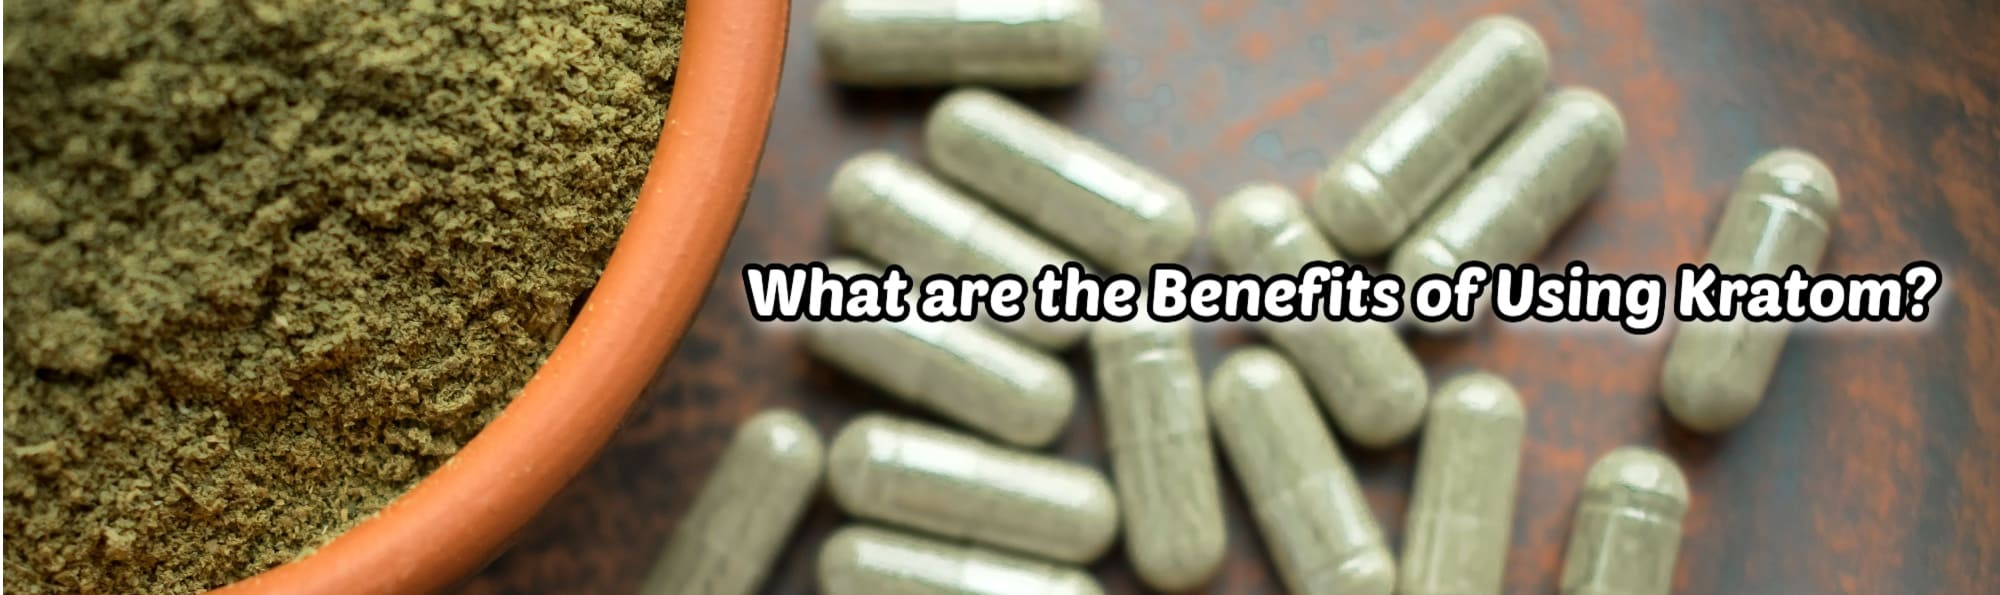 image of what are the benefits of using kratom